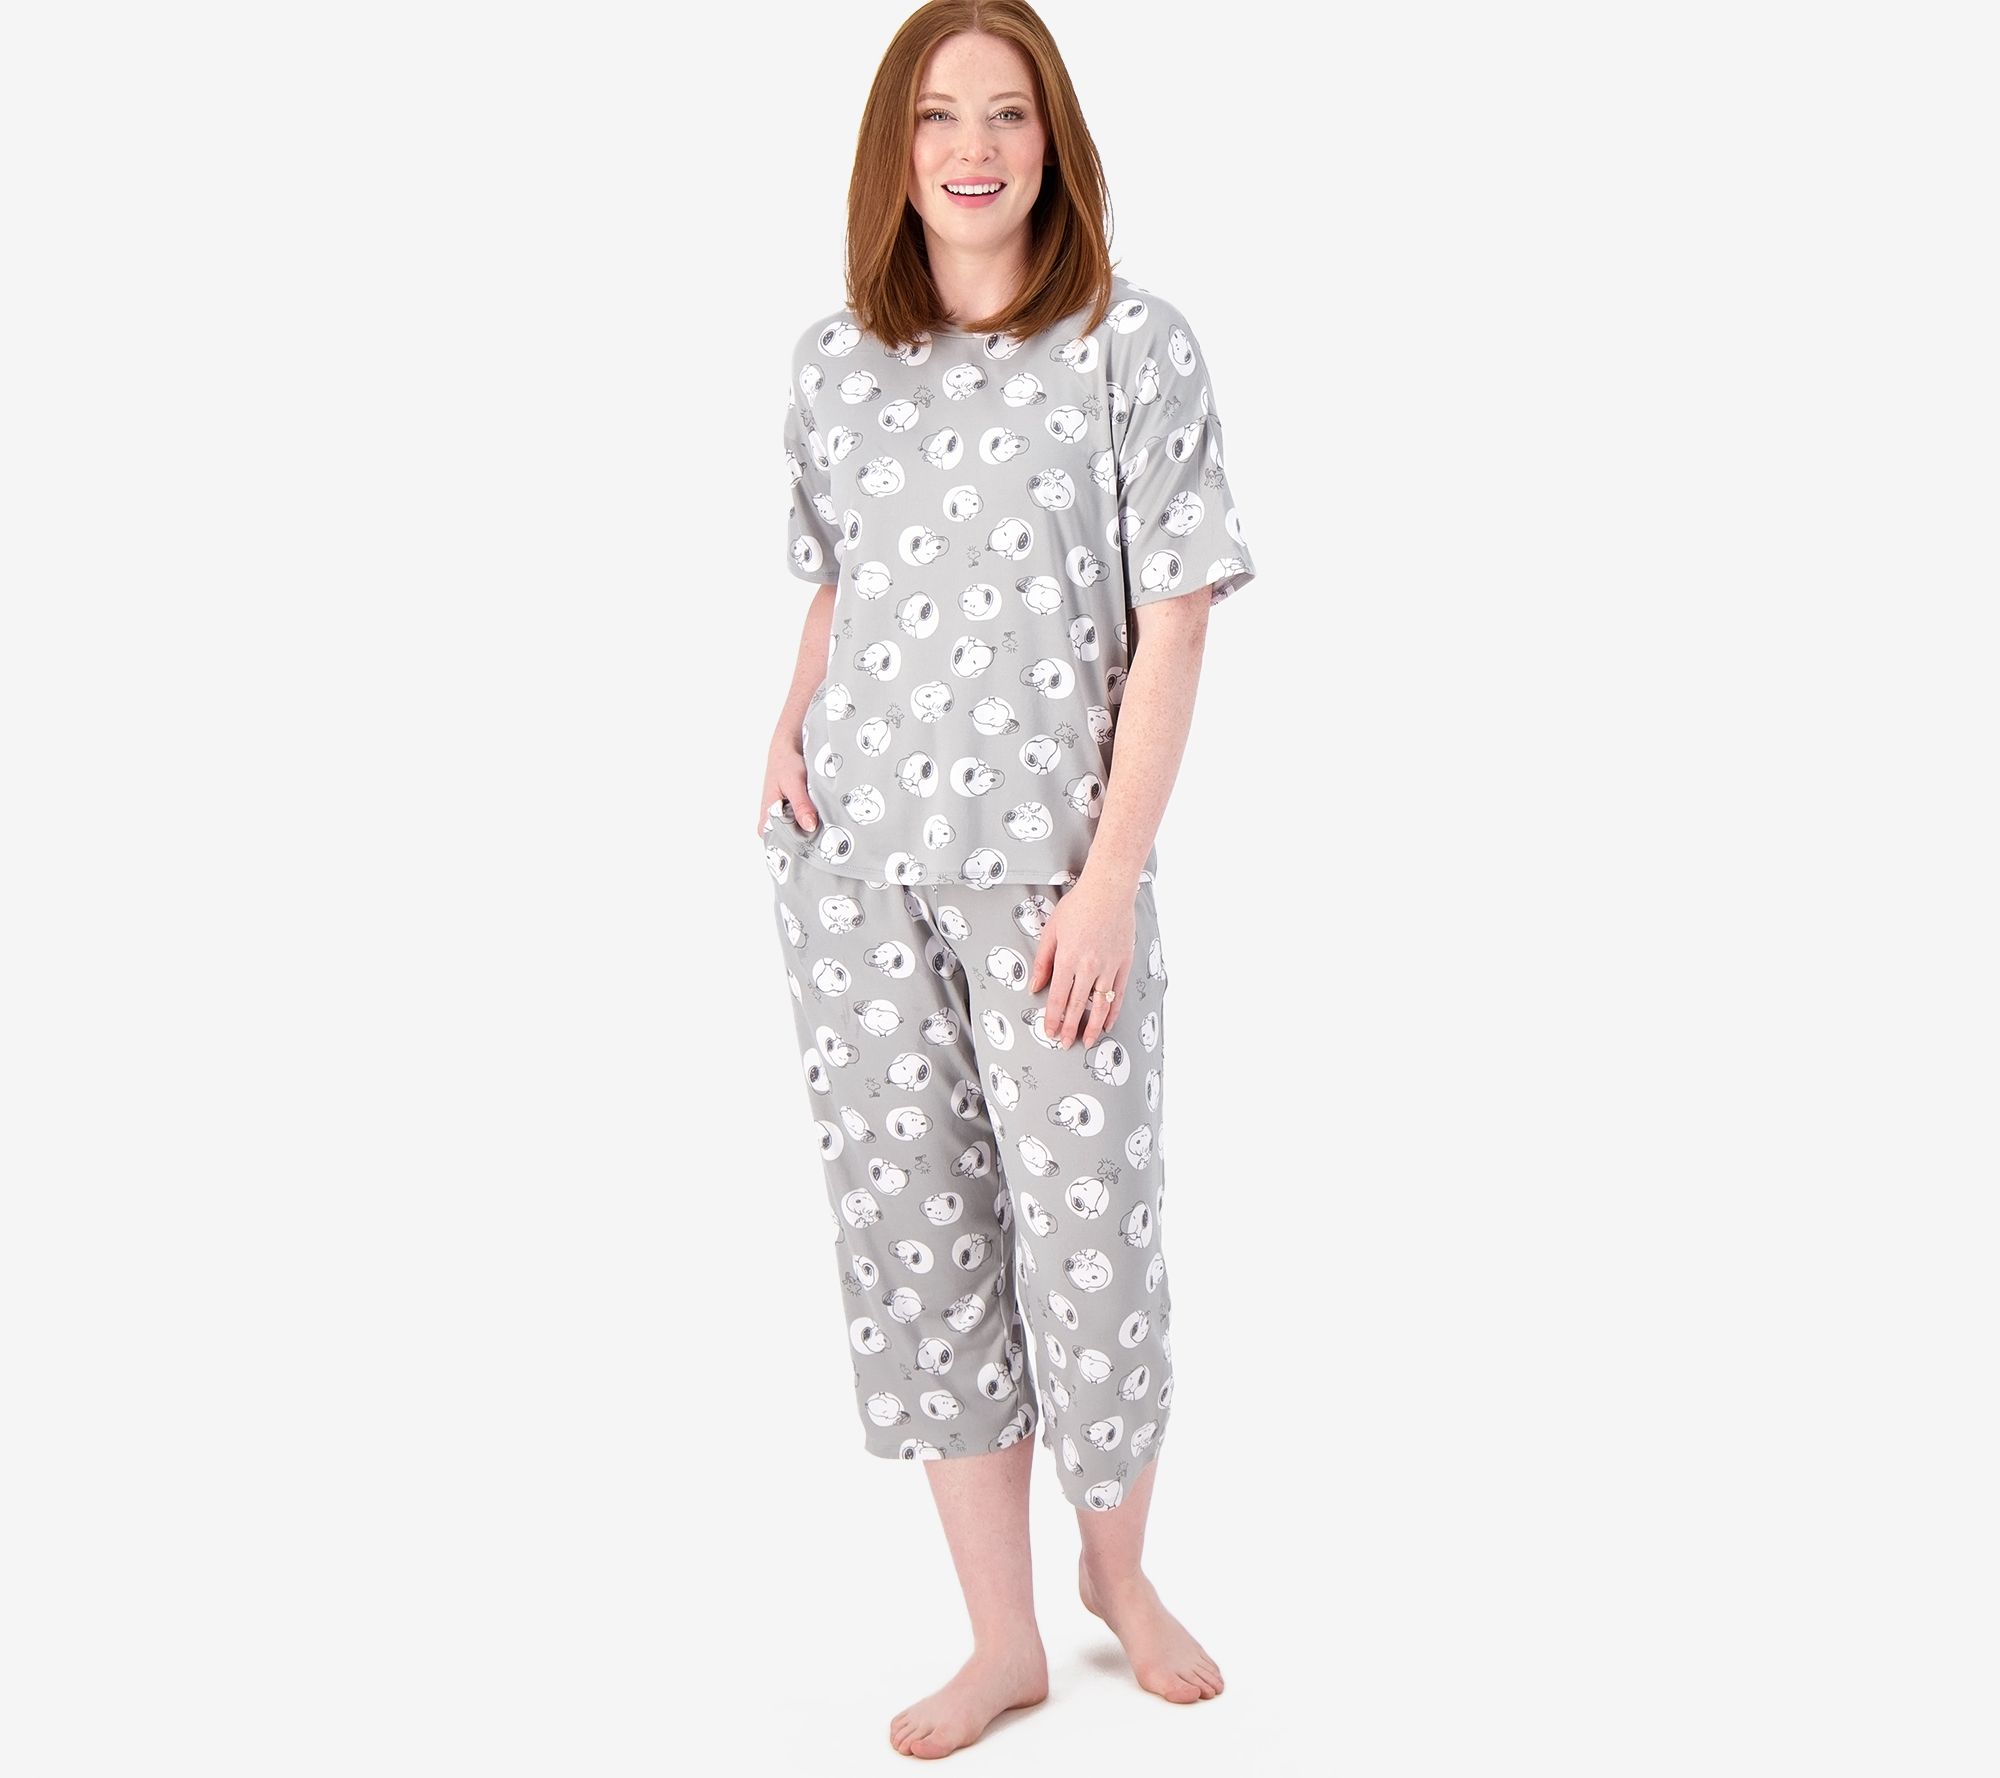 Shoppers Say This $30 Target Pajama Set Feels Ultra-Soft